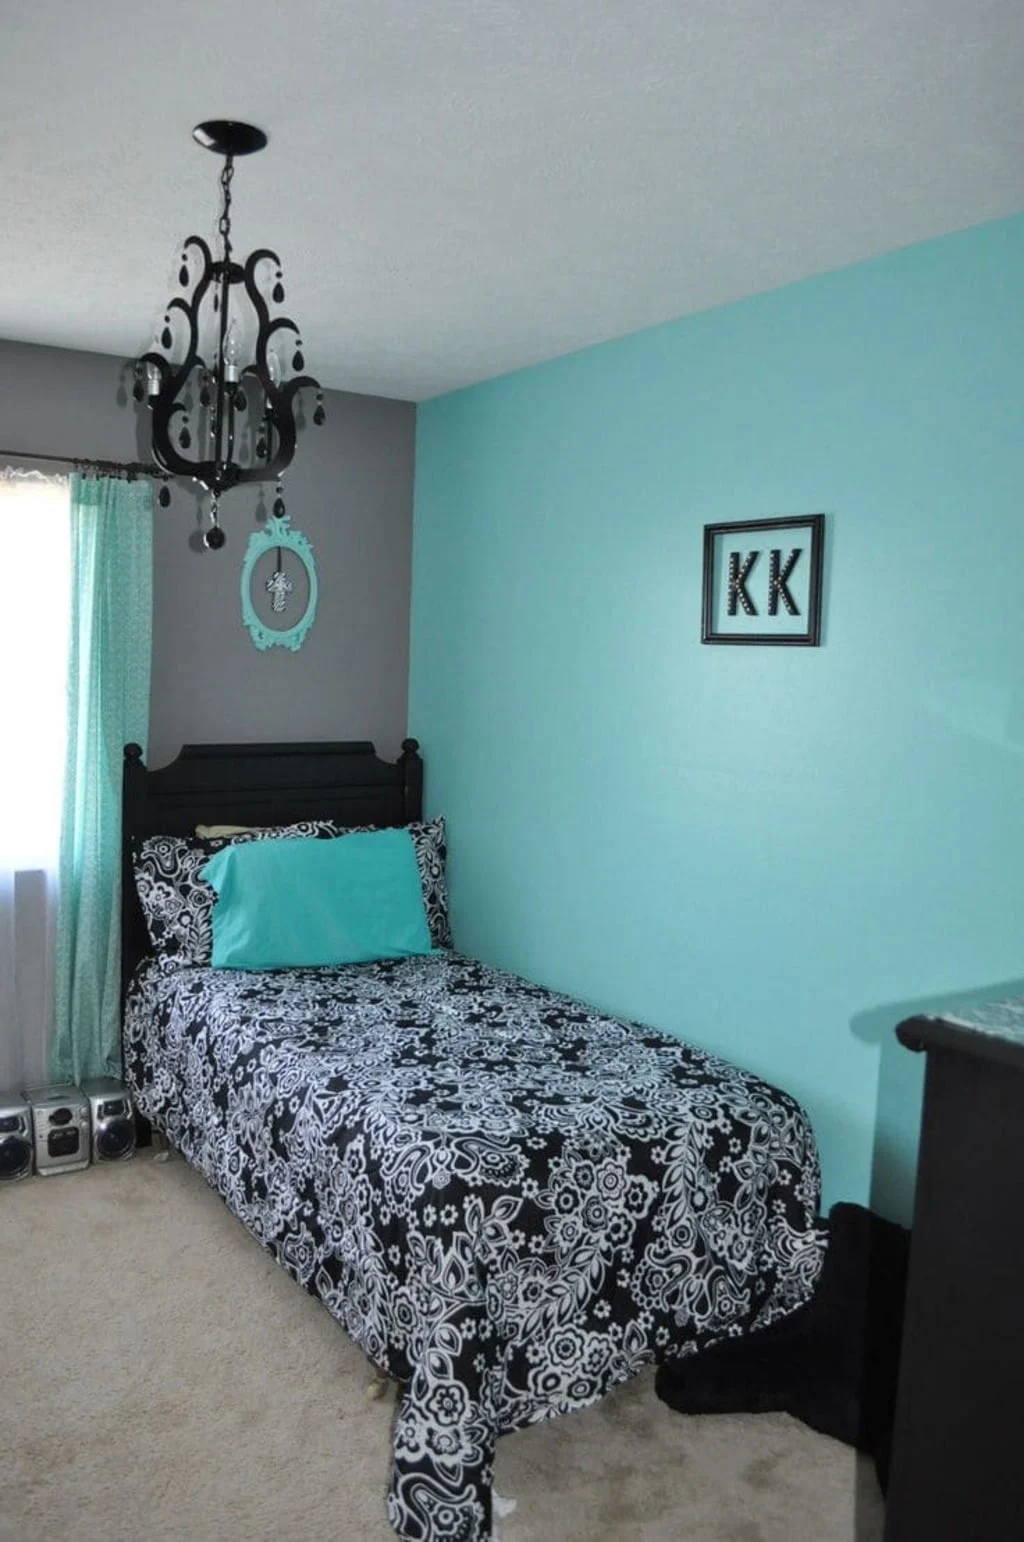  Mint Blue and Grey two colour combination for bedroom walls